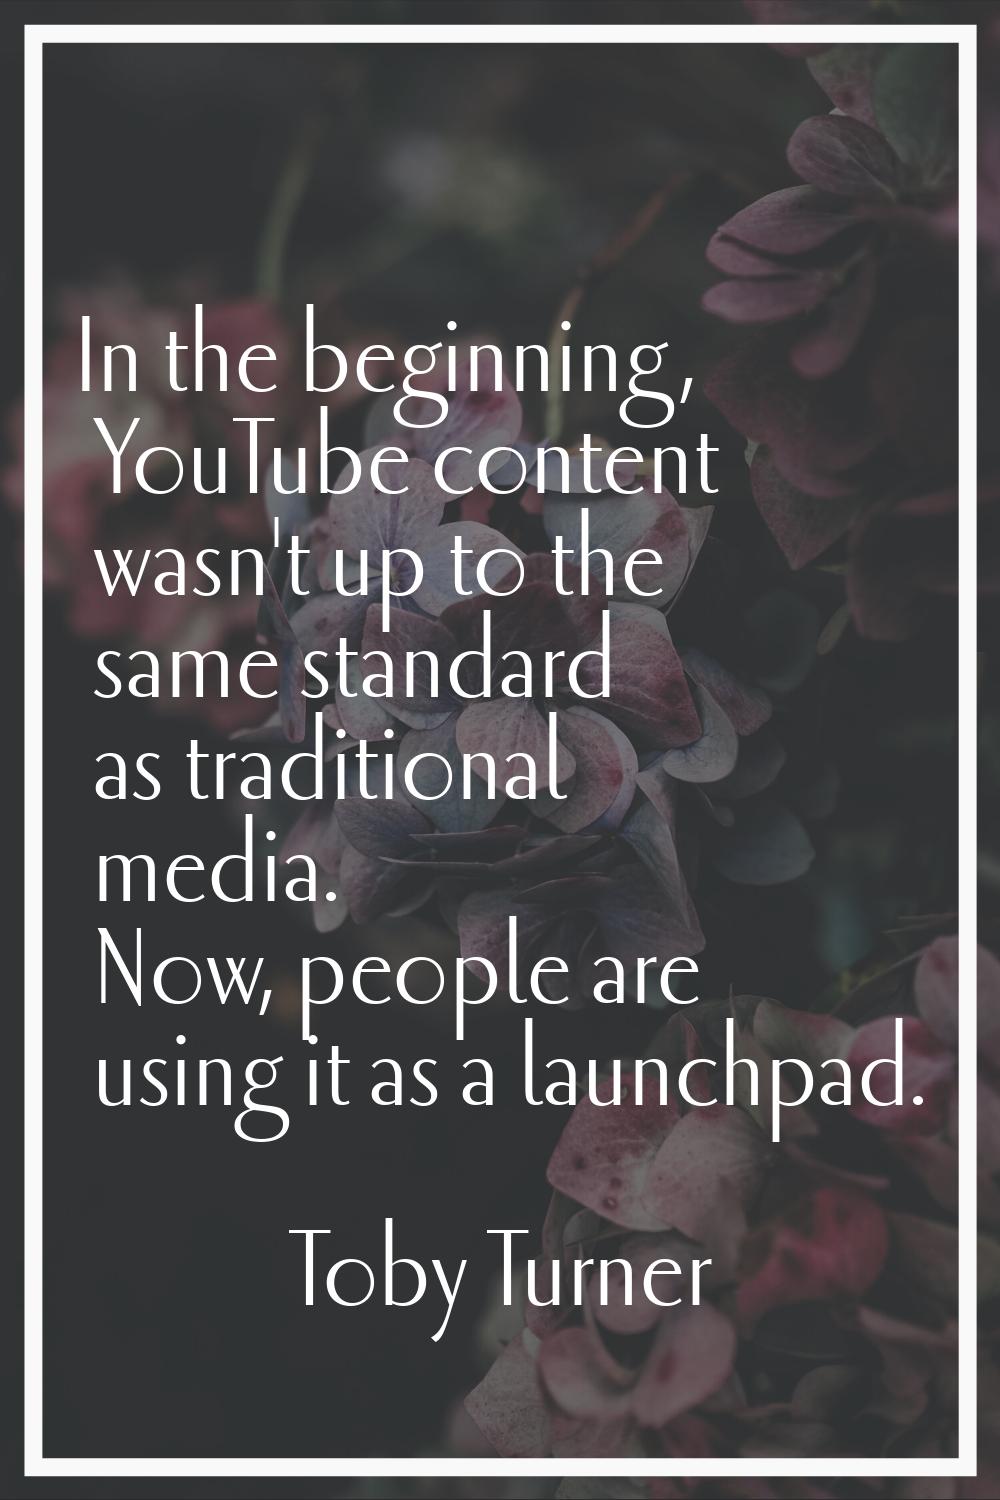 In the beginning, YouTube content wasn't up to the same standard as traditional media. Now, people 